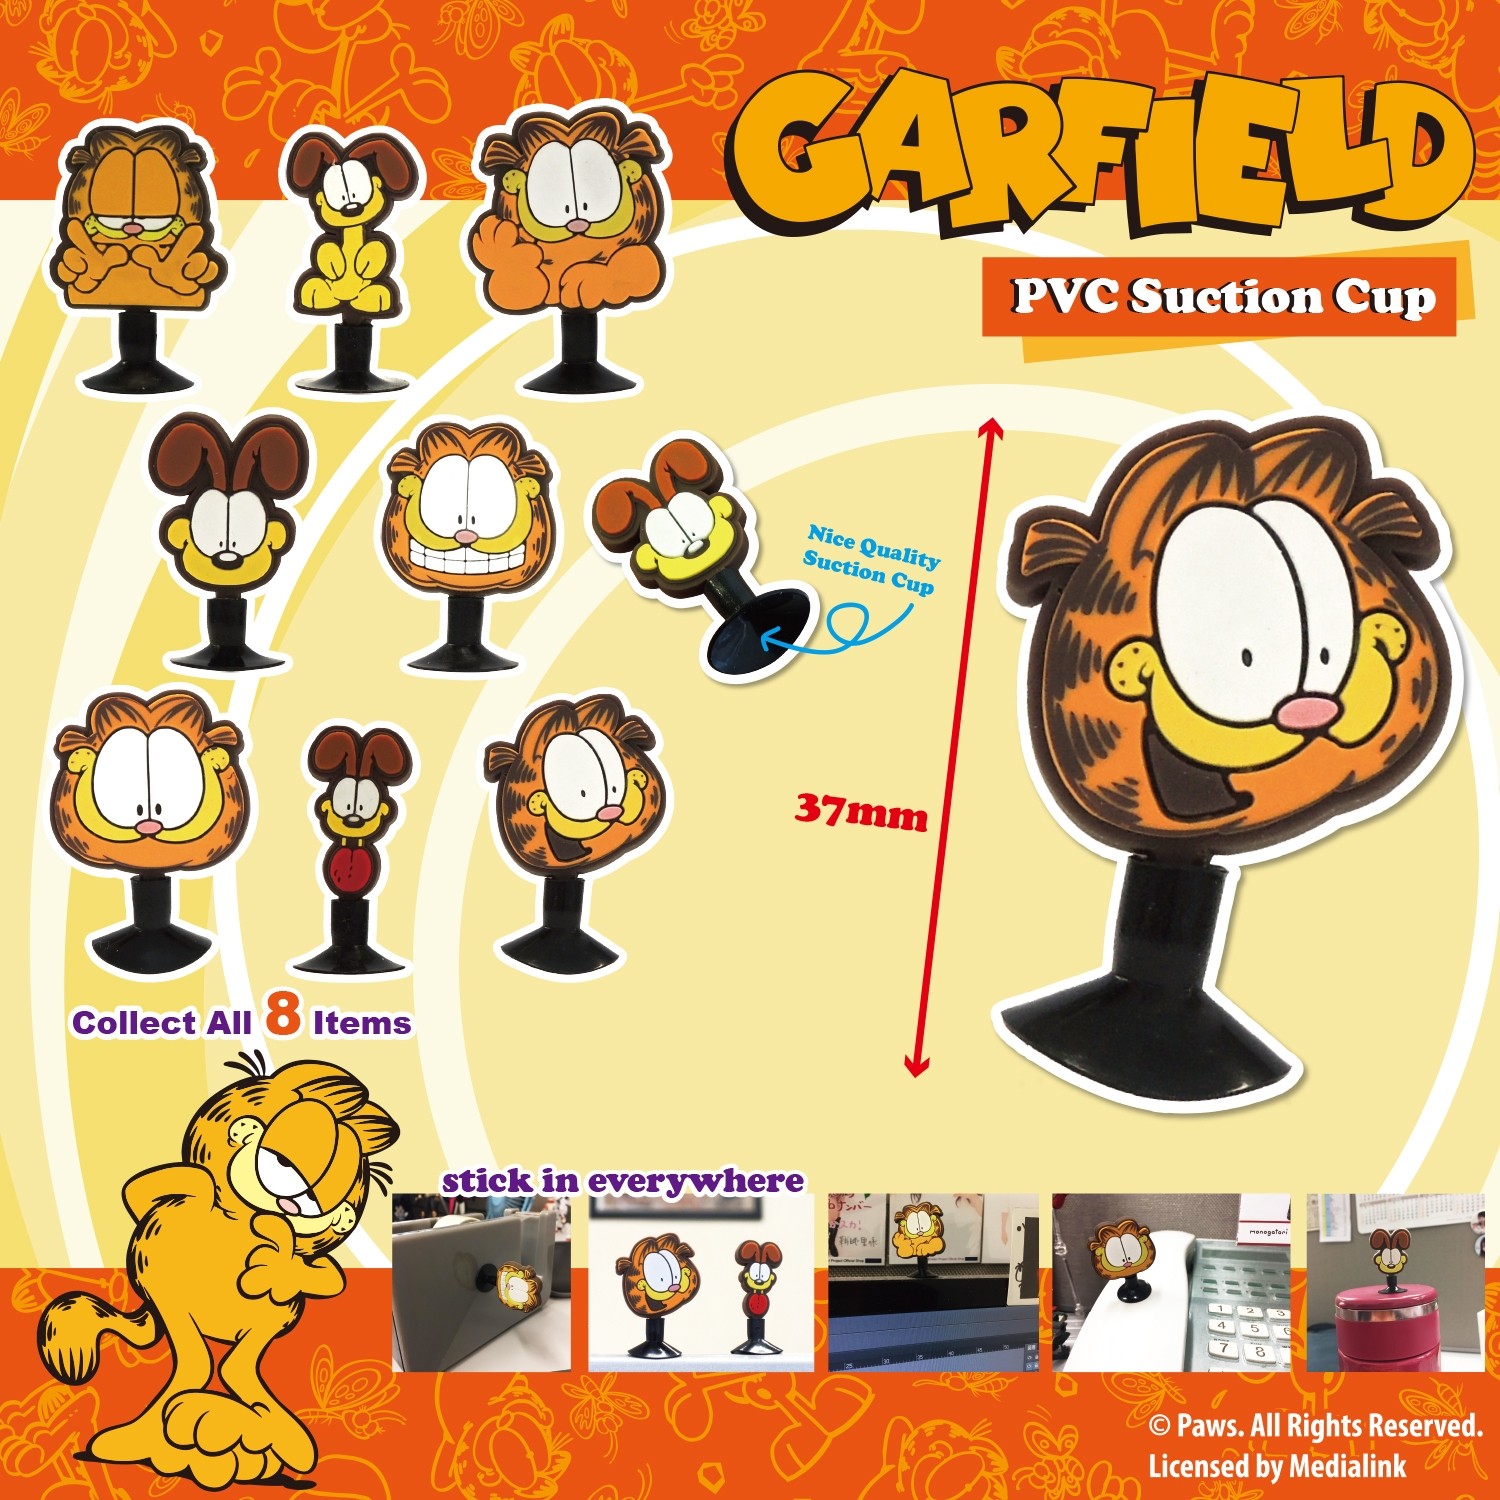 Garfield PVC Suction Cup